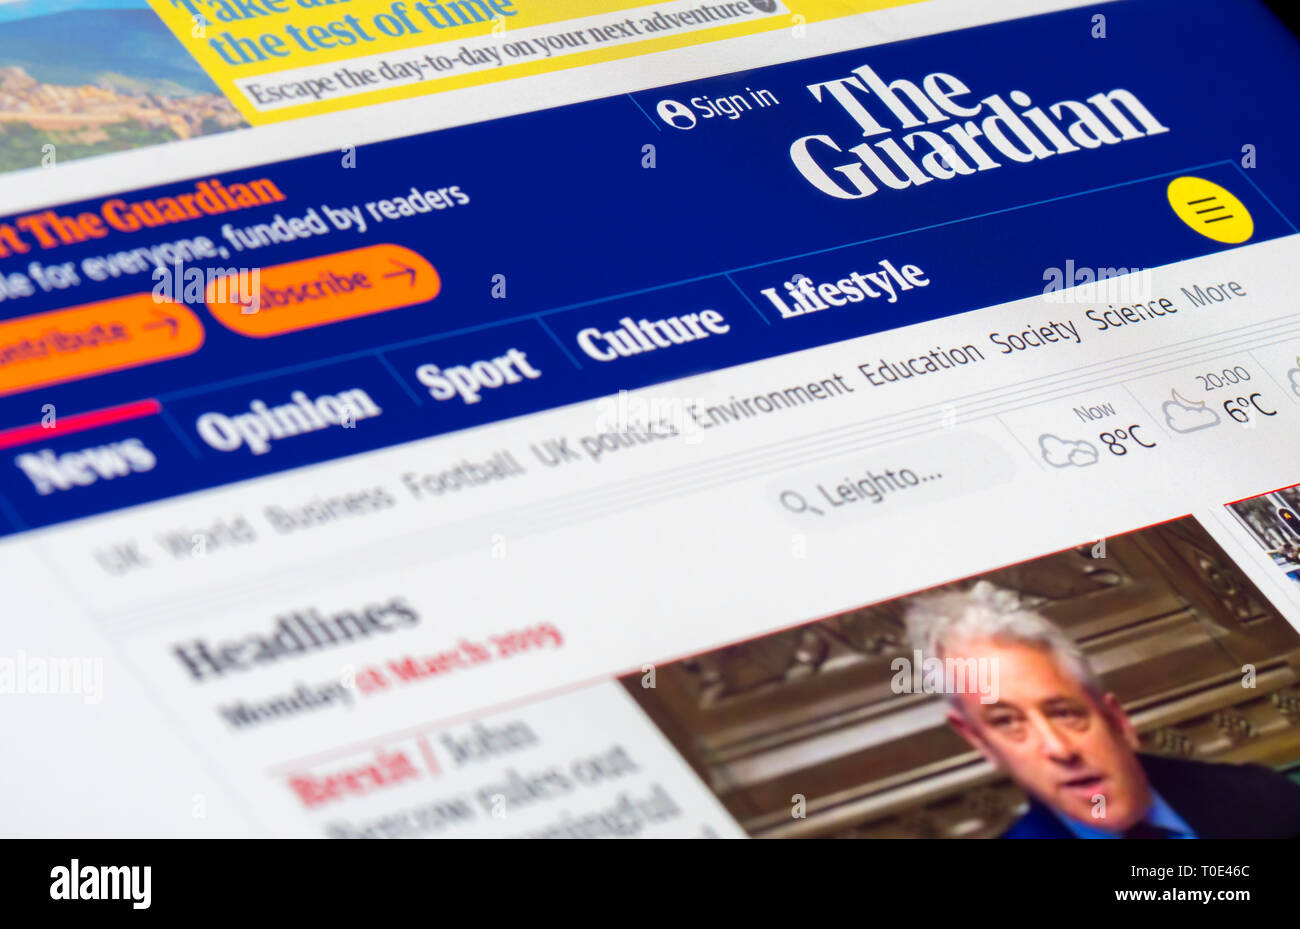 The Guardian news website front page for the online version of the Guardian Newspaper in the UK.. Stock Photo